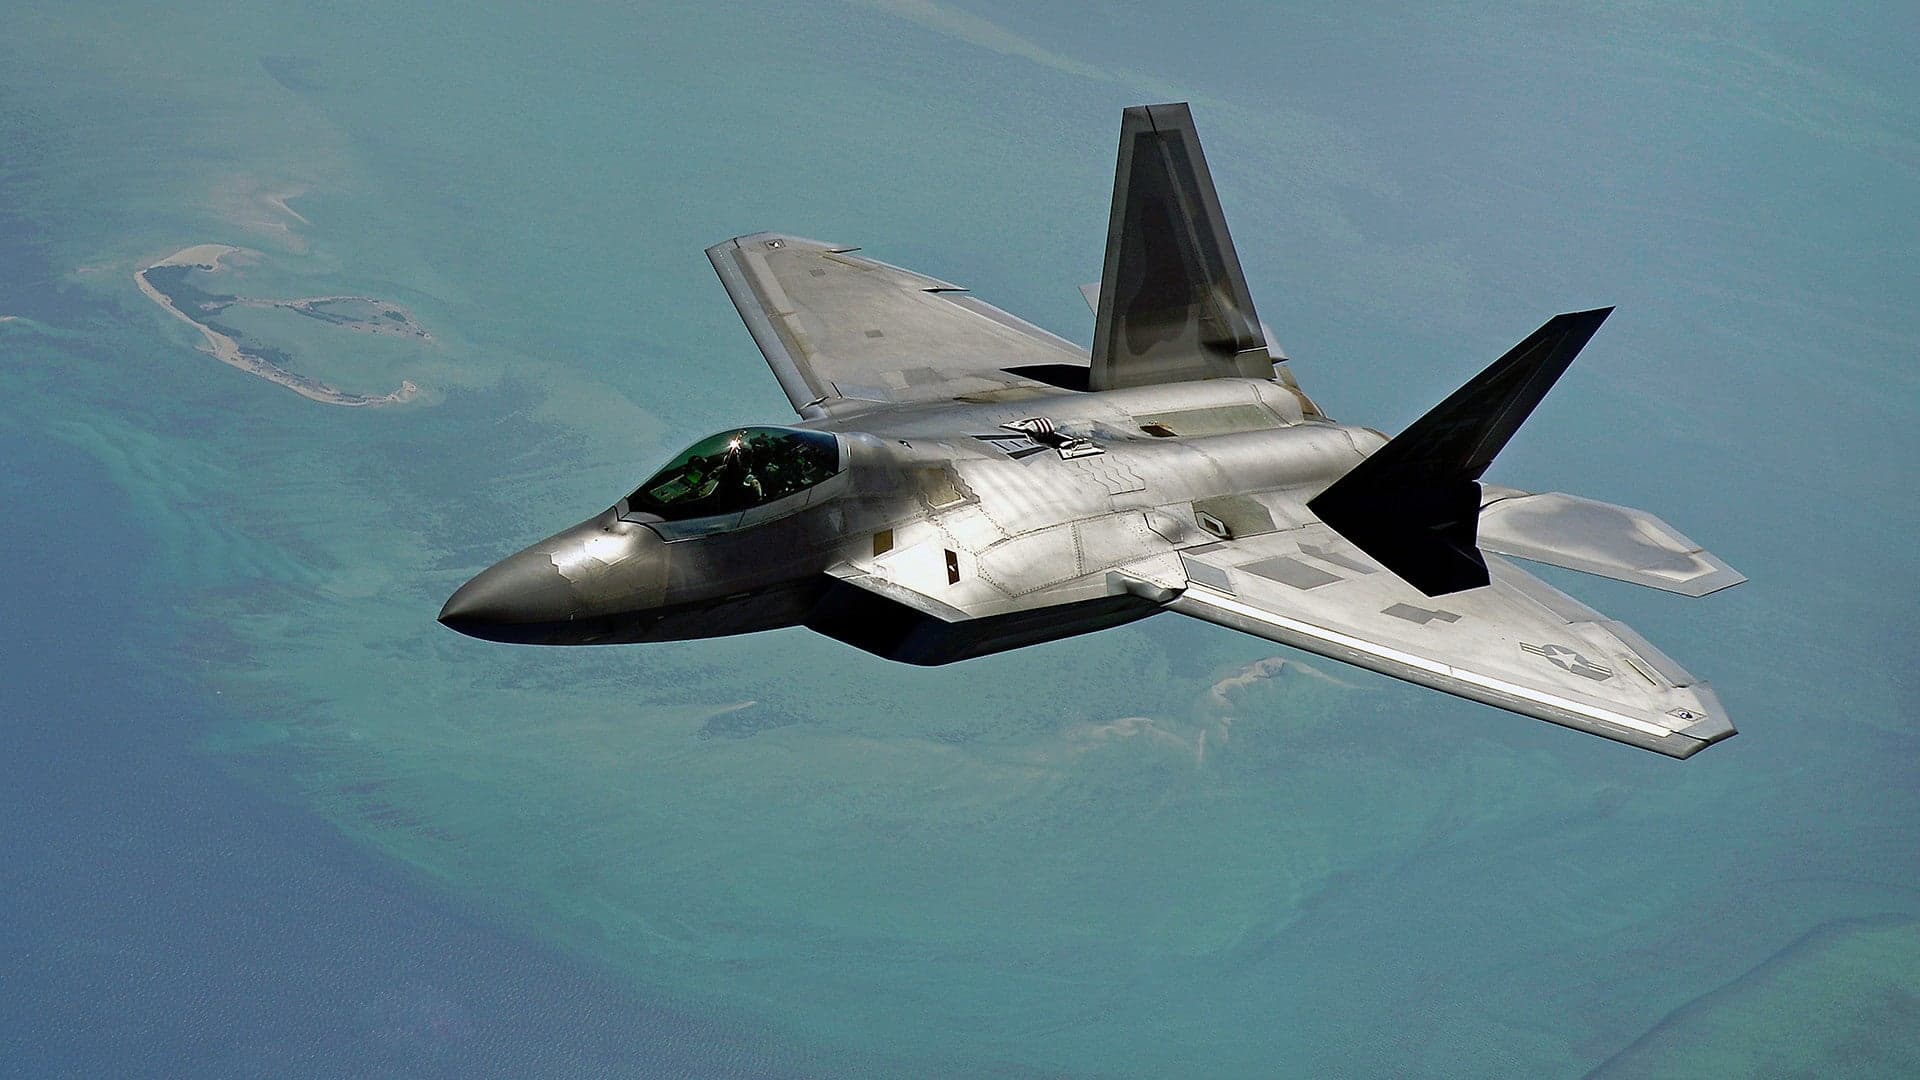 F-22 Raptor Stealth Fighter Crashes During Training Flight In Florida (Updated)